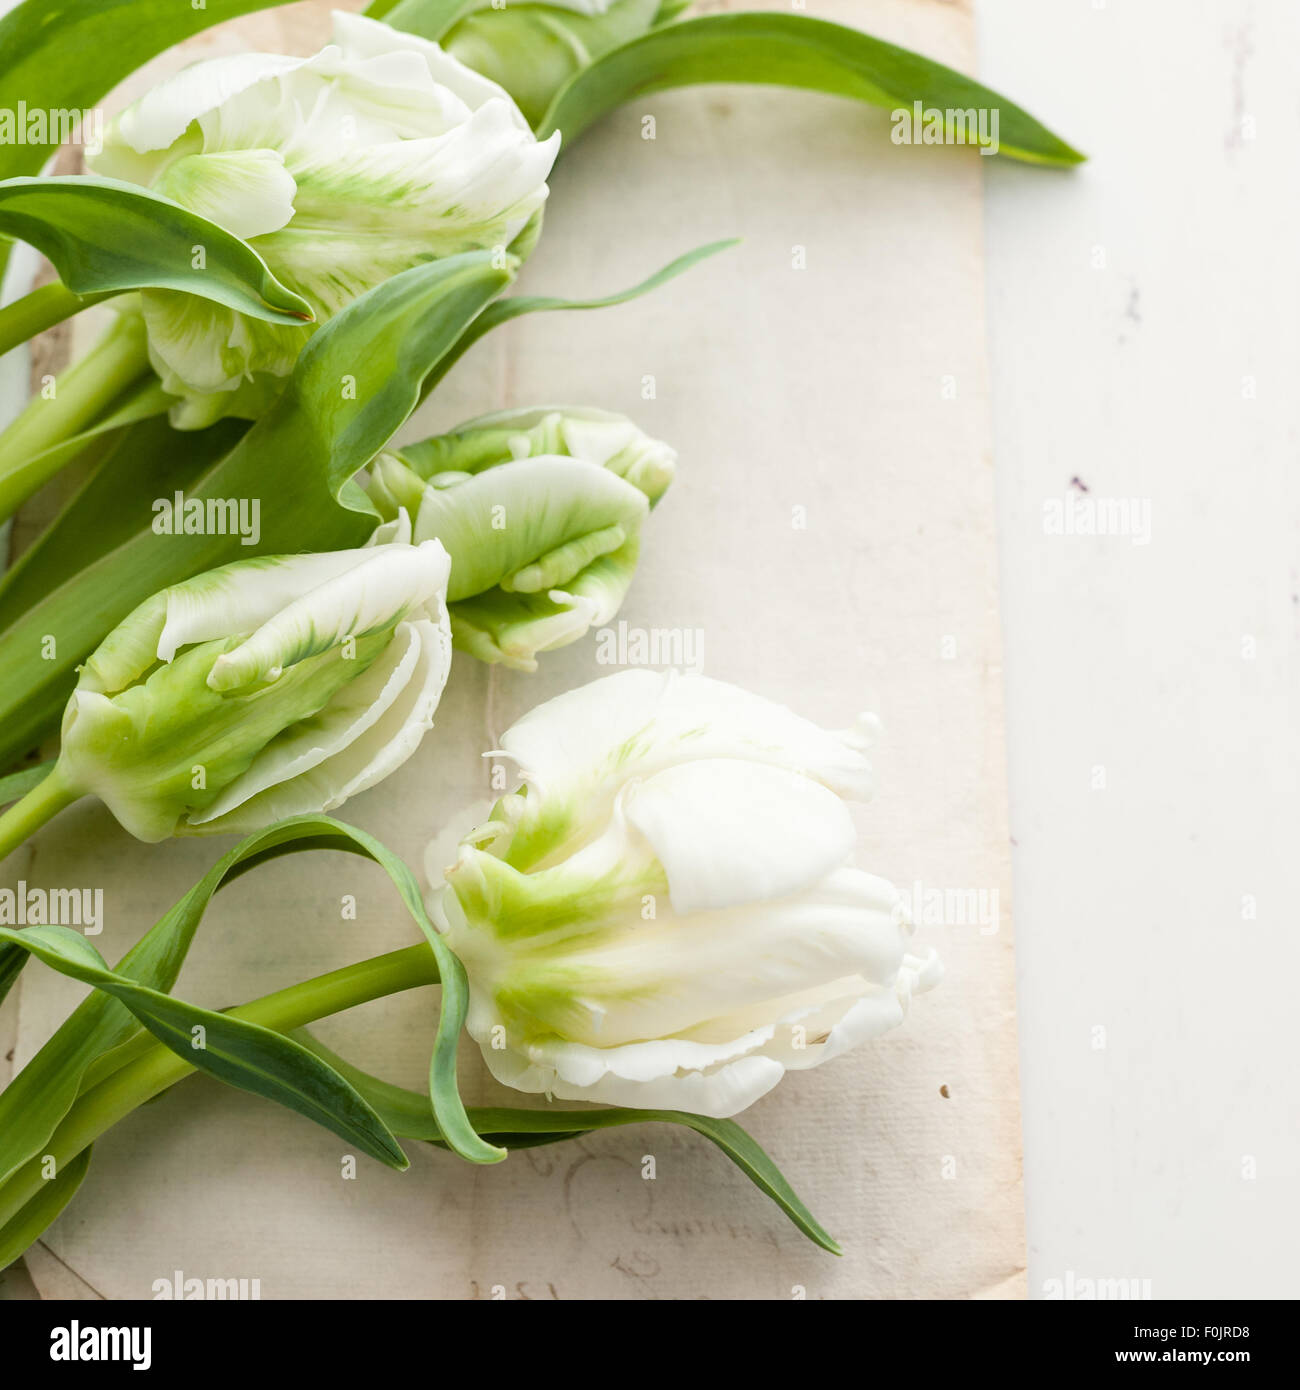 white and green parrot tulips on an old letter Stock Photo